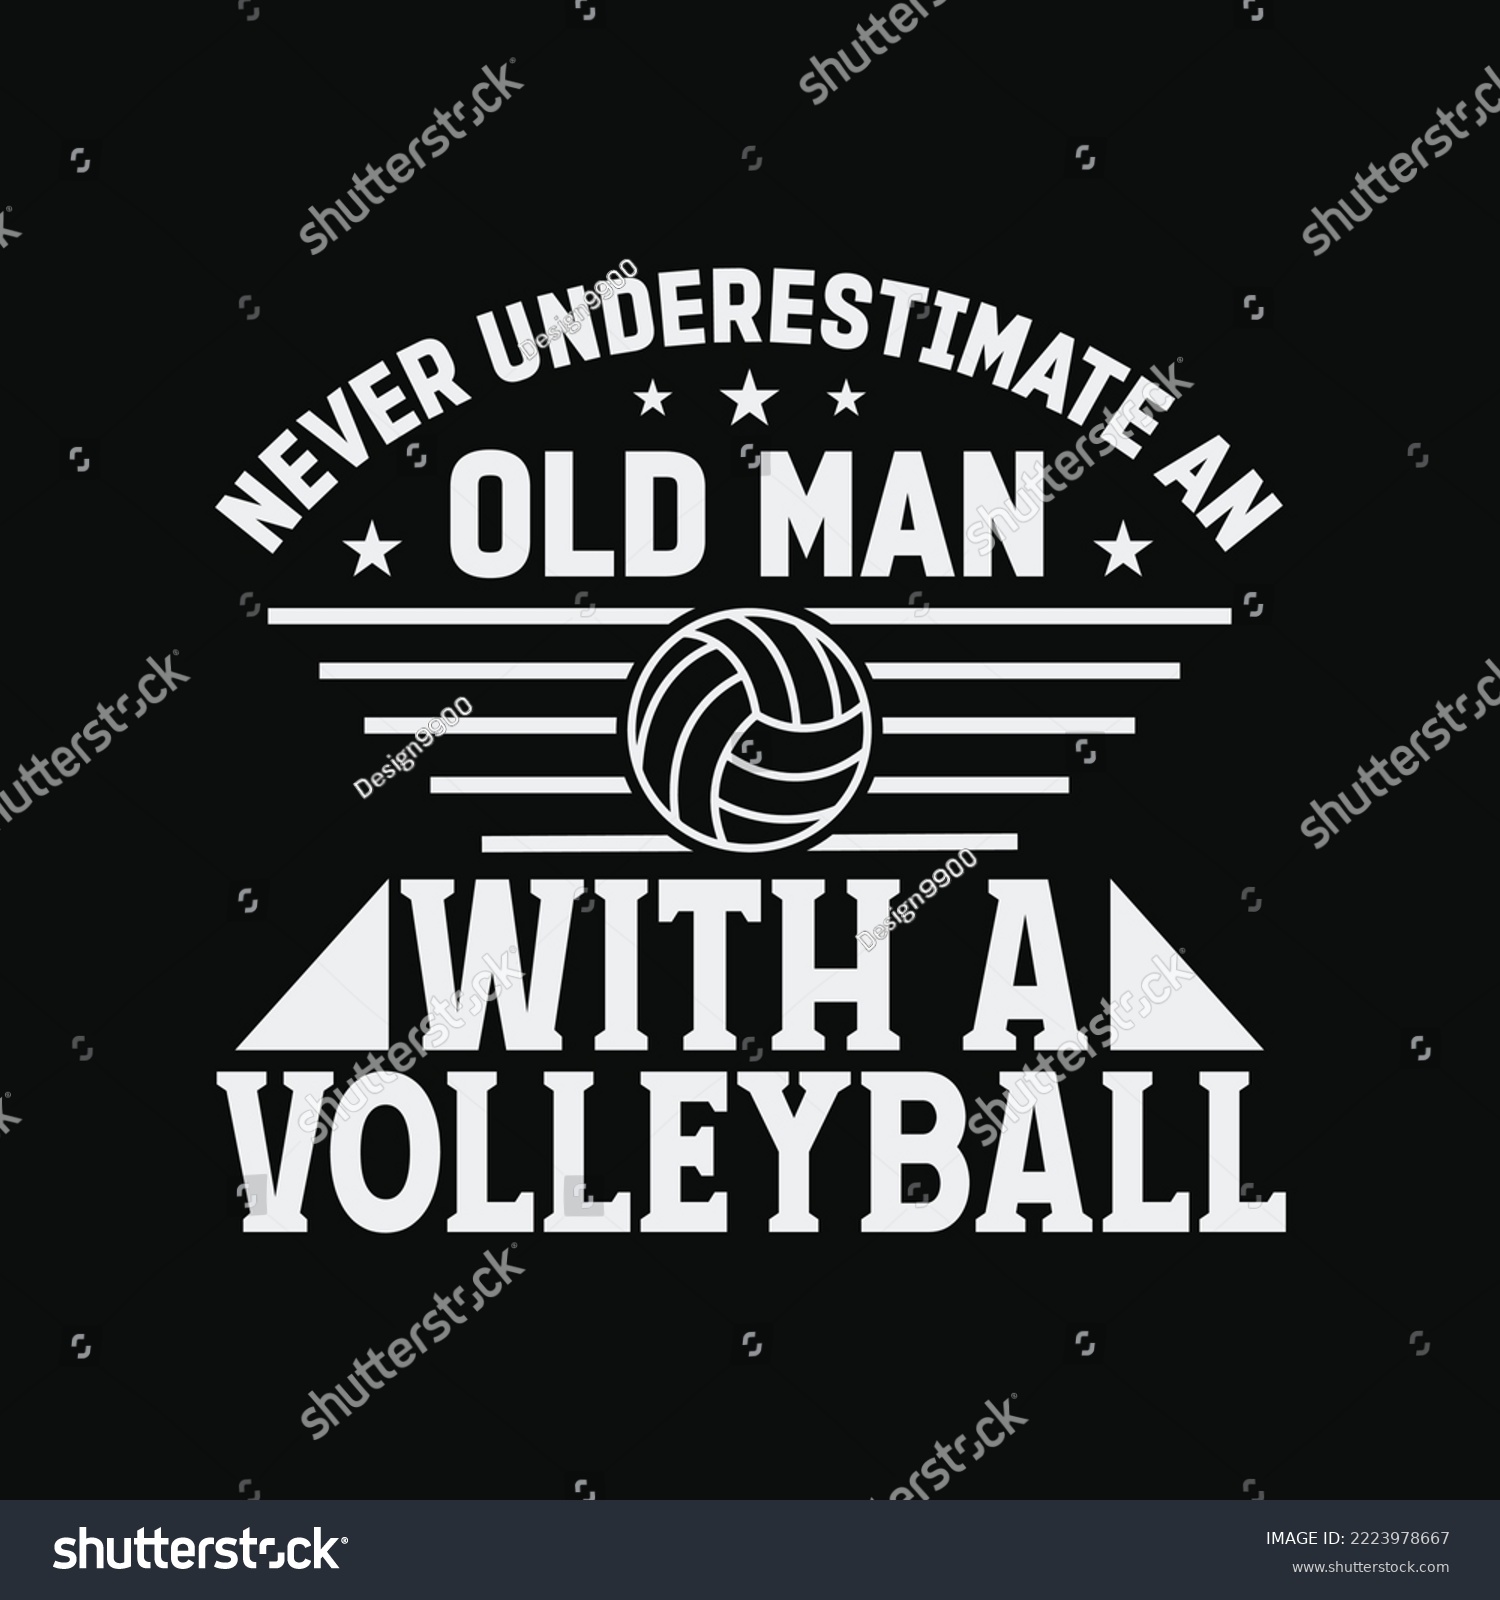 SVG of Old Man Volleyball design For Men svg png printable cutting files svg